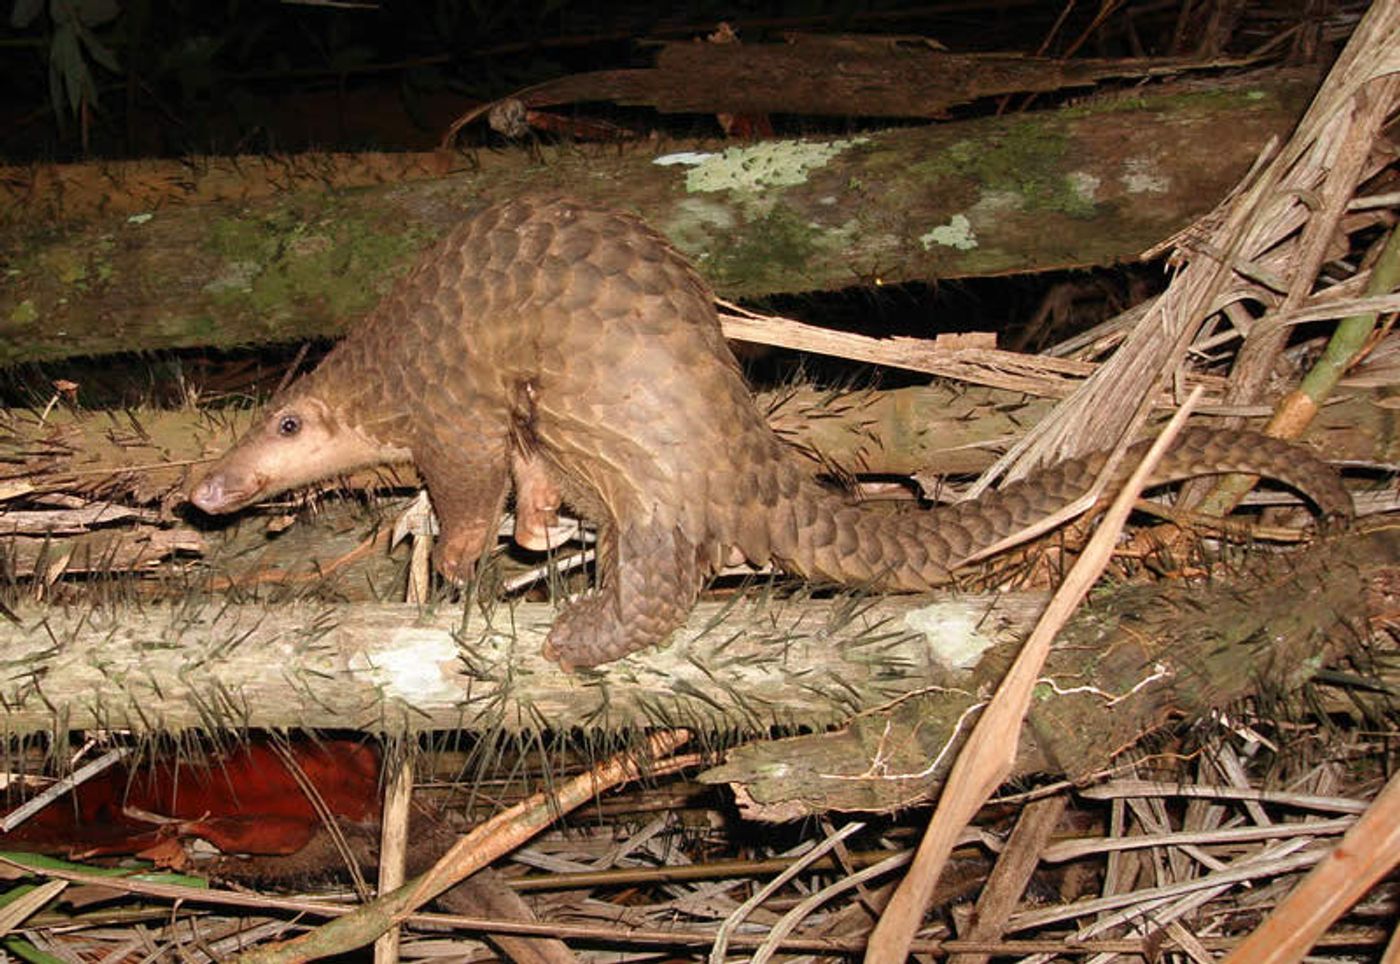 Pangolin scales are valuable, making the creature one of the world's highest-poached animals.